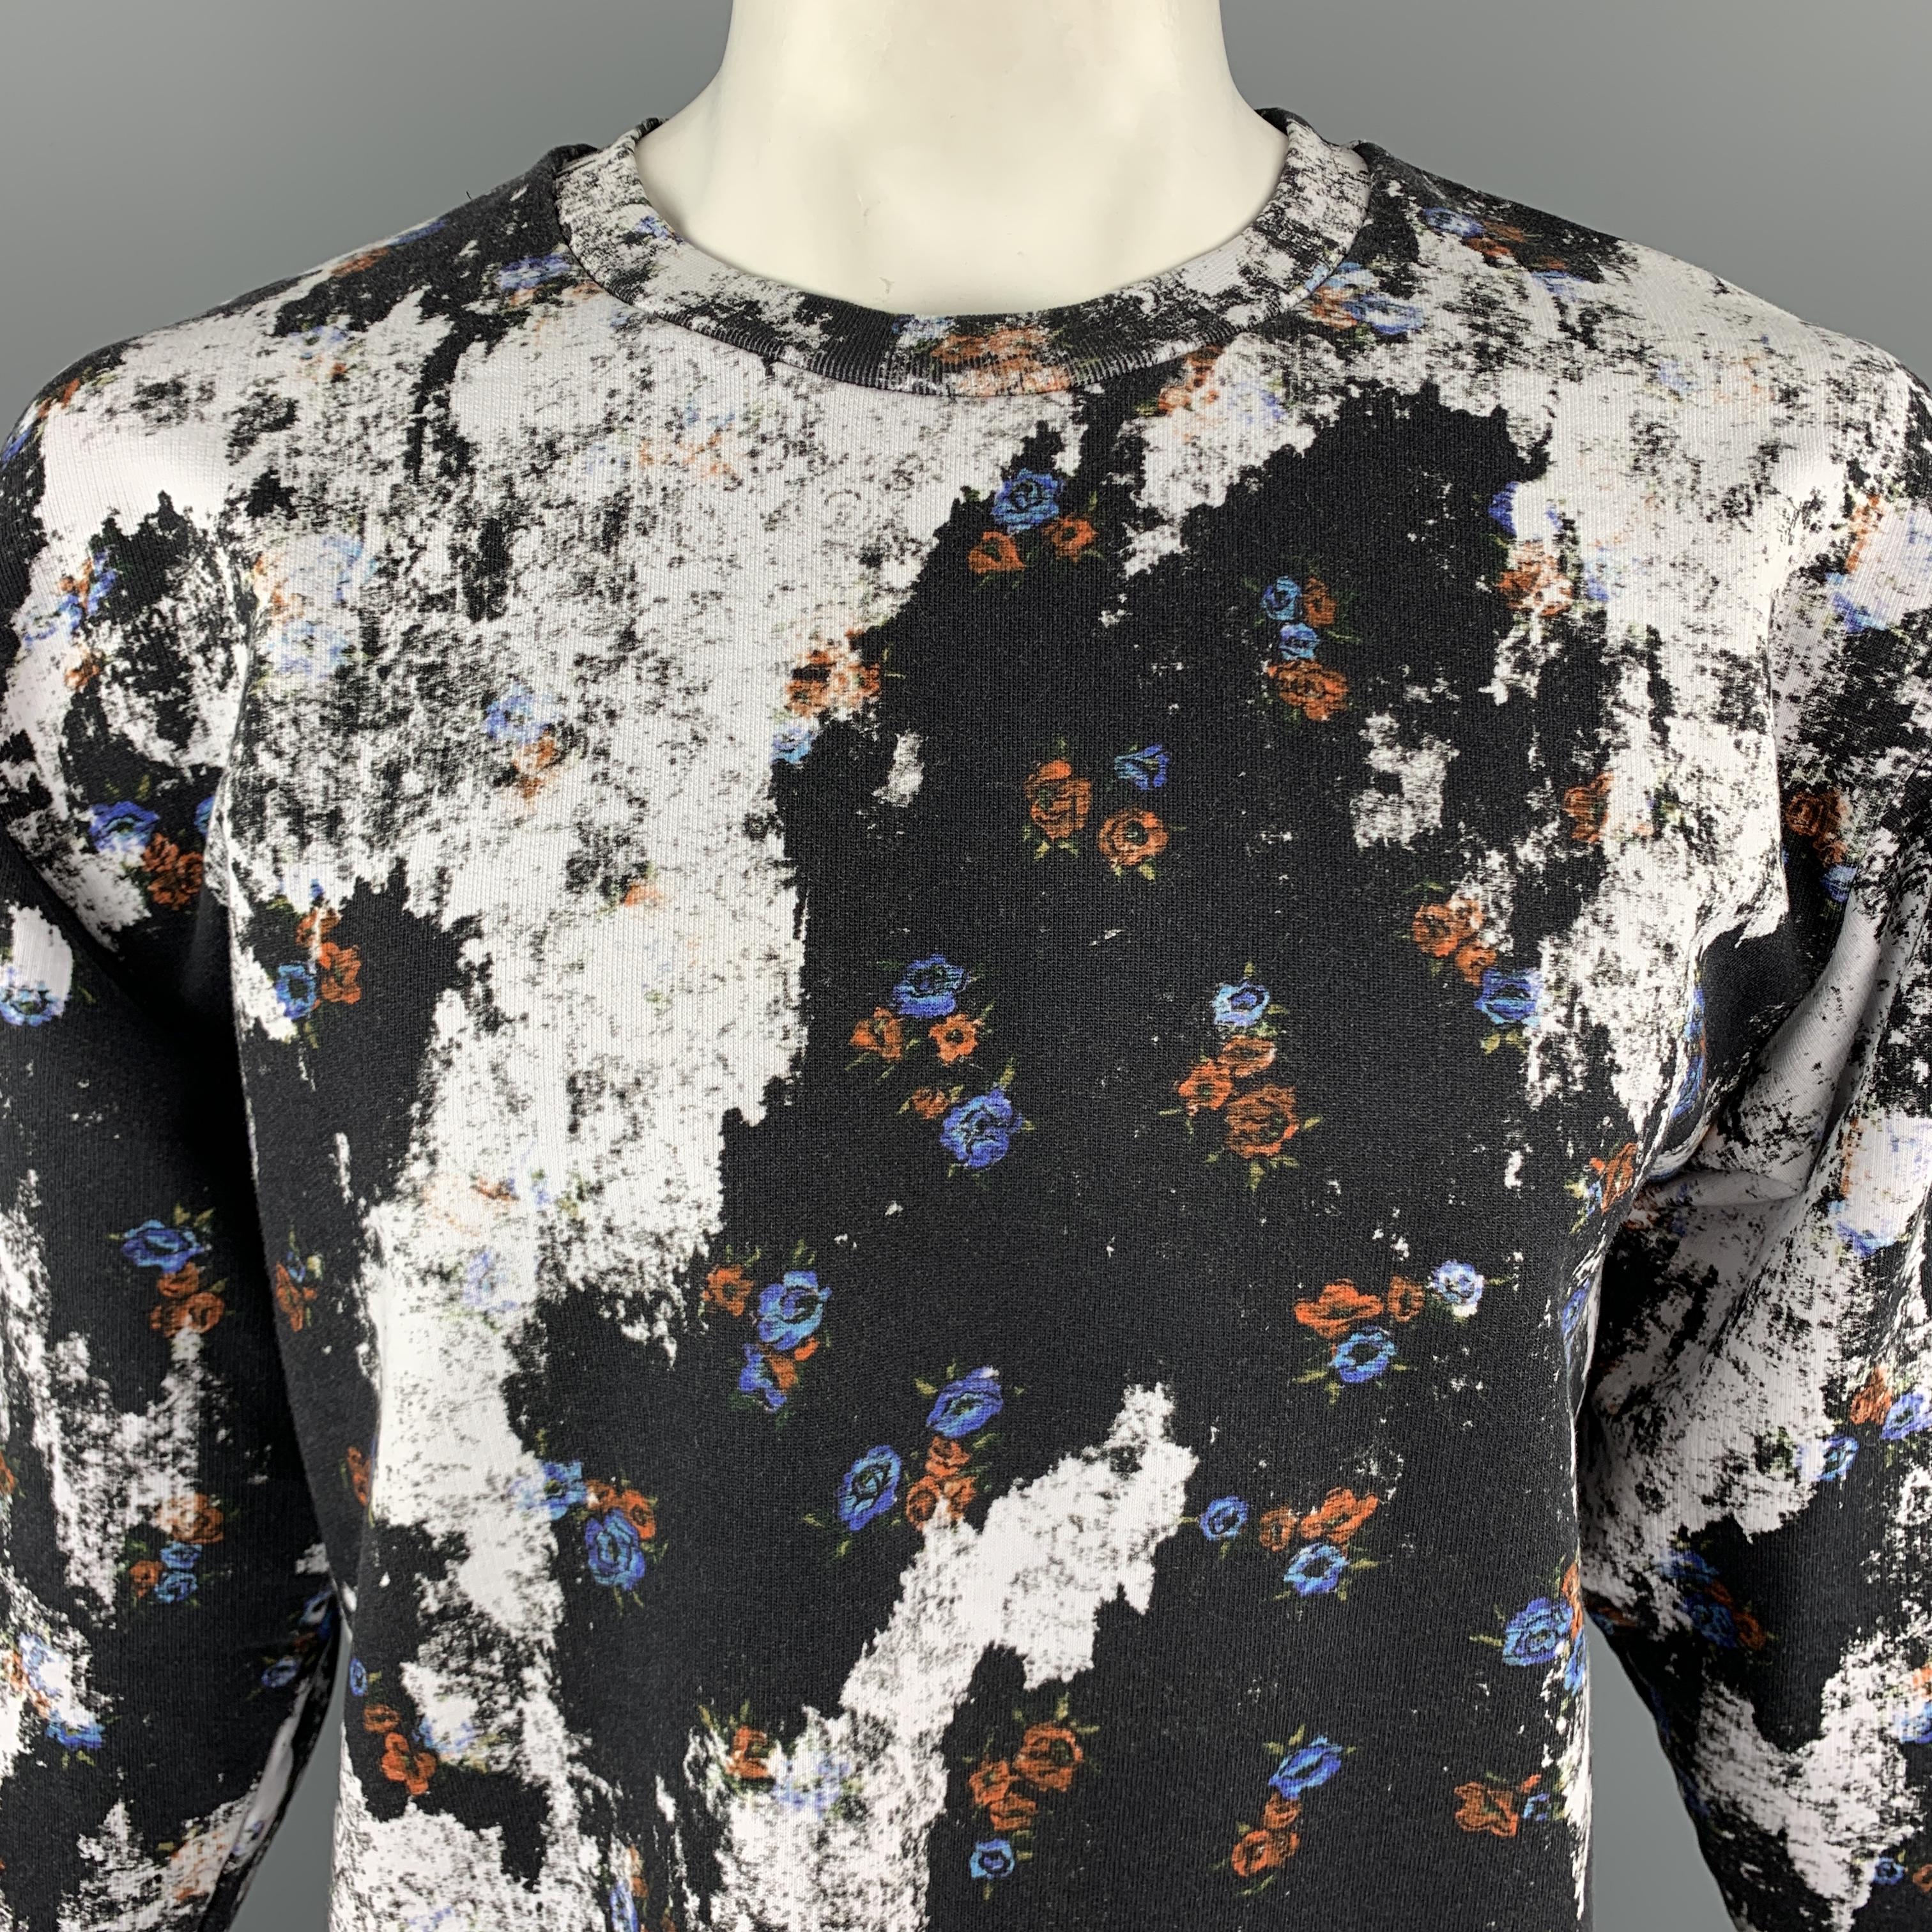 MCQ by ALEXANDER MCQUEEN Sweatshirt comes in black and white tones in a floral distressed print cotton material, with a crewneck and ribbed cuffs and hem. 

Excellent Pre-Owned Condition.
Marked: L

Measurements:

Shoulder: 21 in. 
Chest: 44 in.